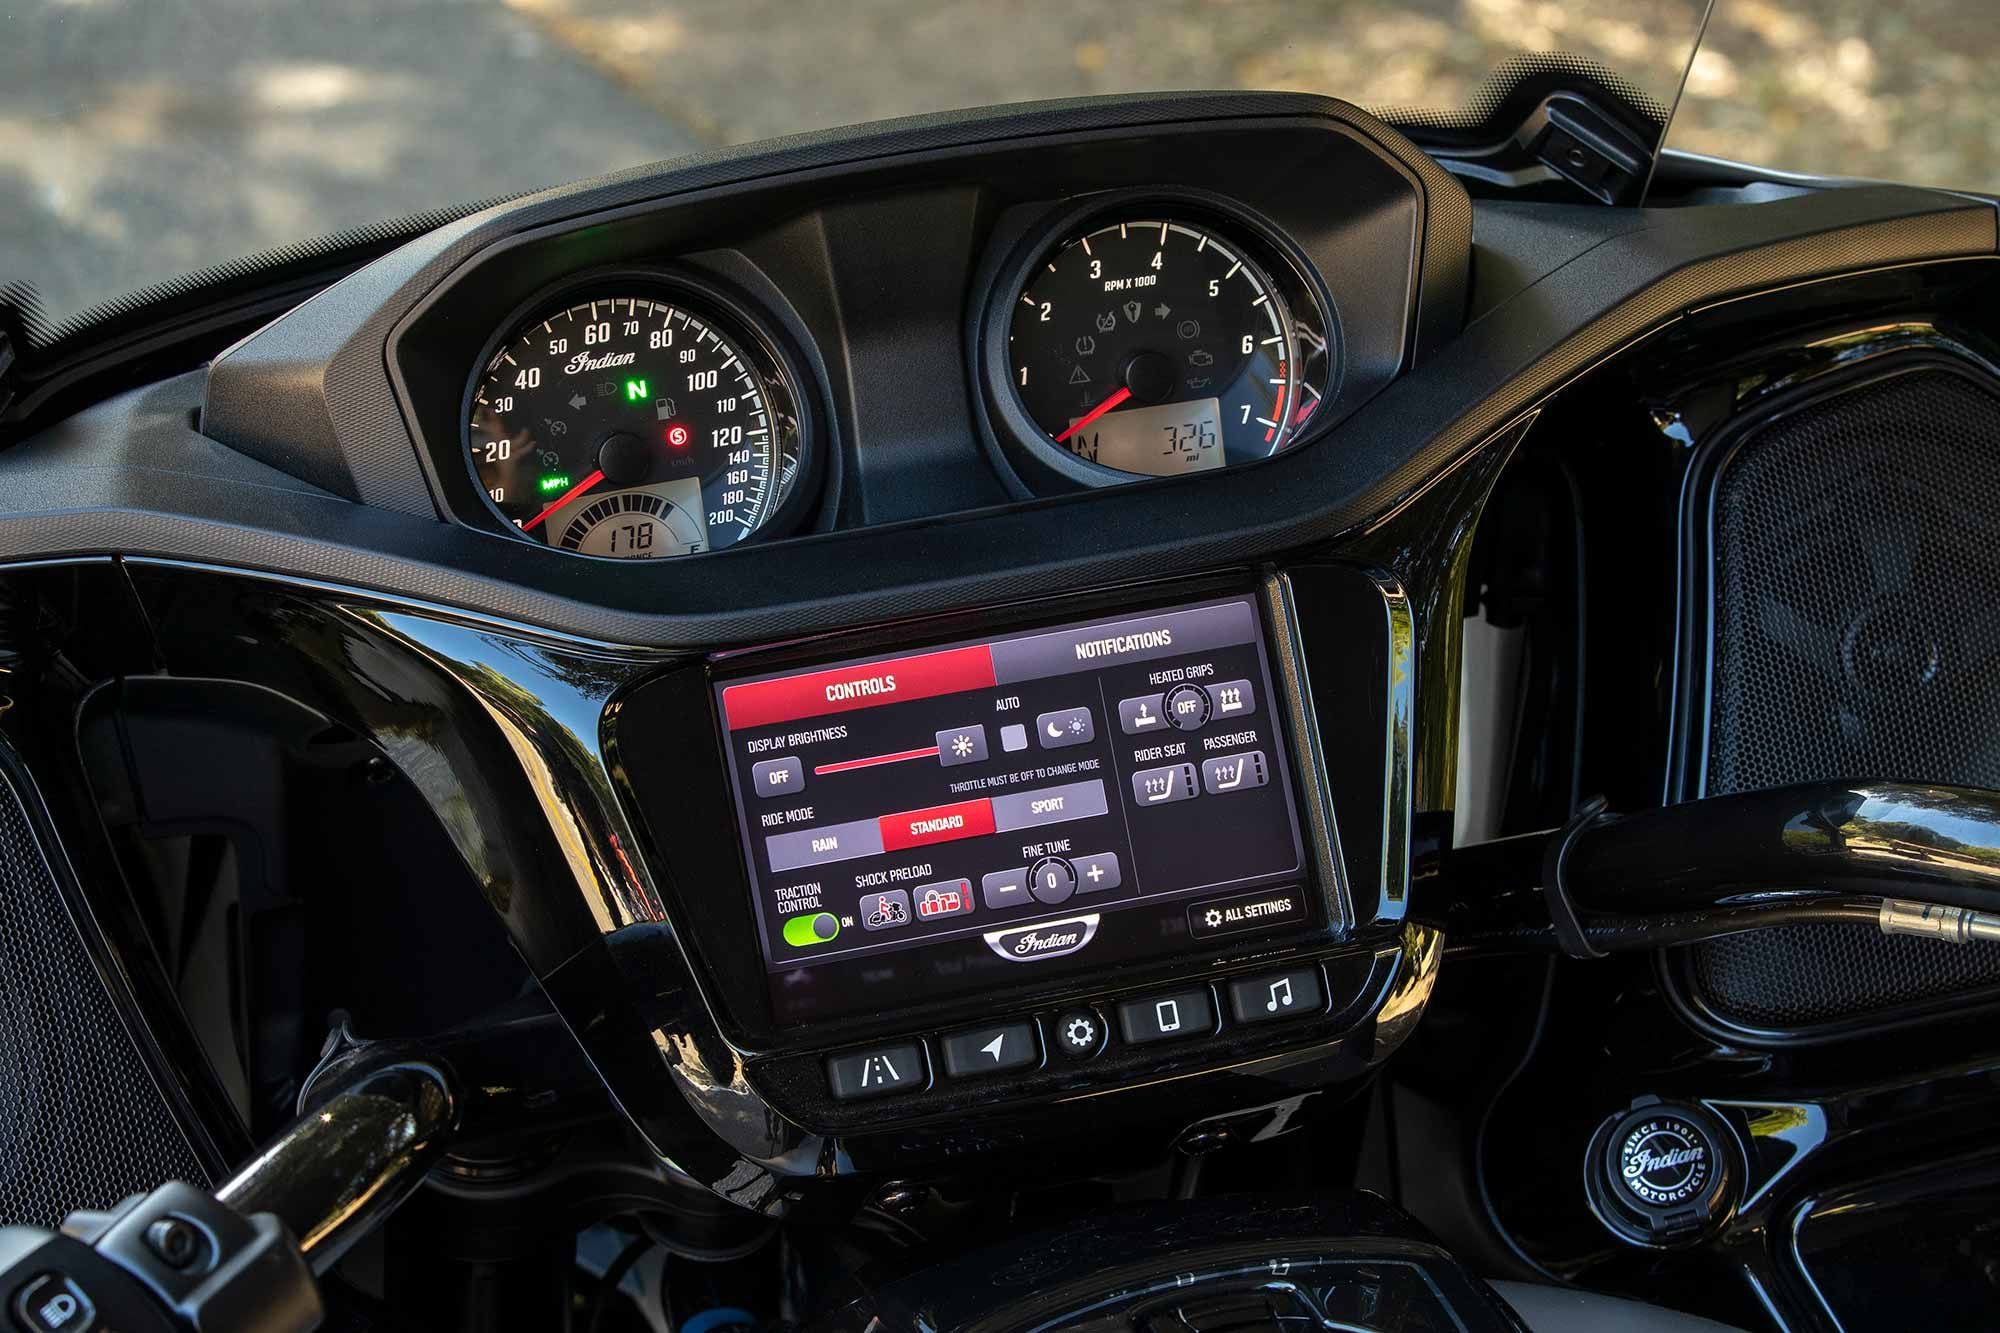 Electronic suspension can be adjusted through the Pursuit’s Ride Command system.